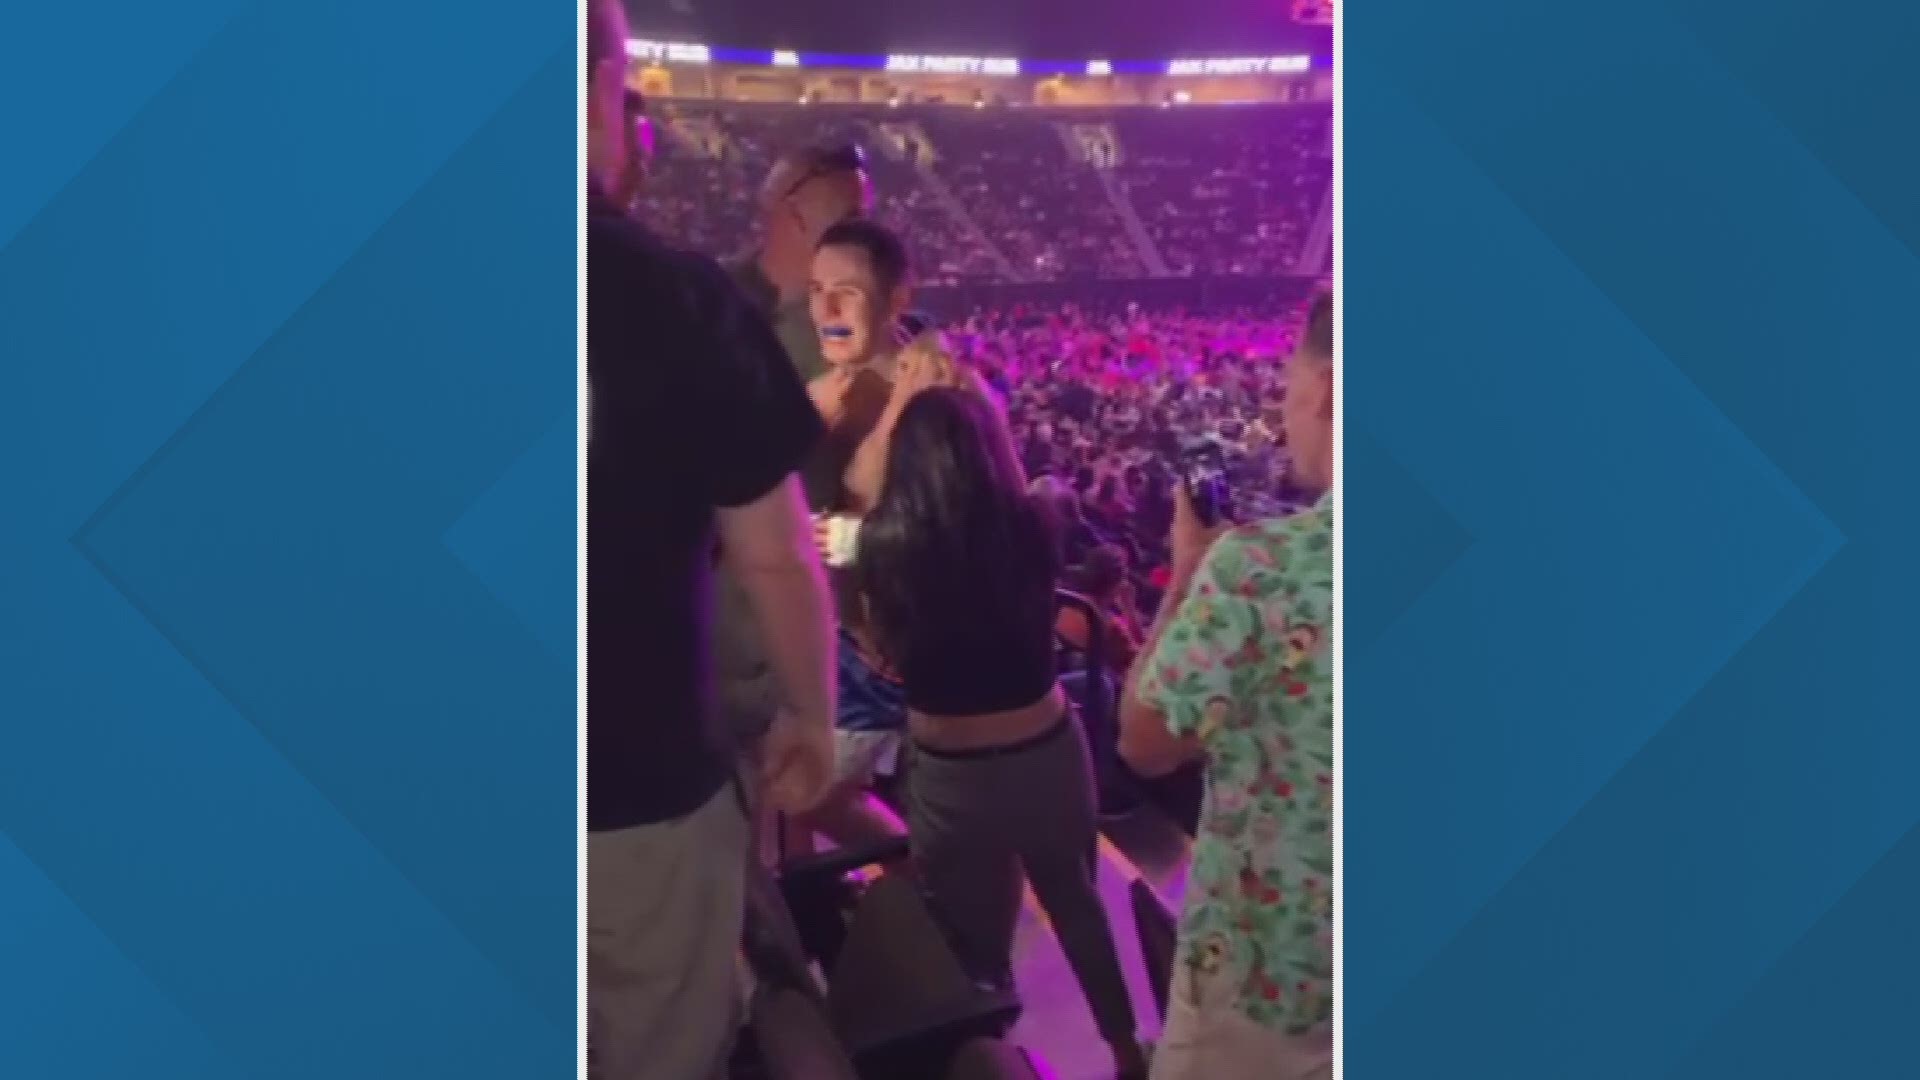 JSO officer proposes to girlfriend after winning Guns N’ Hoses boxing match Saturday night.